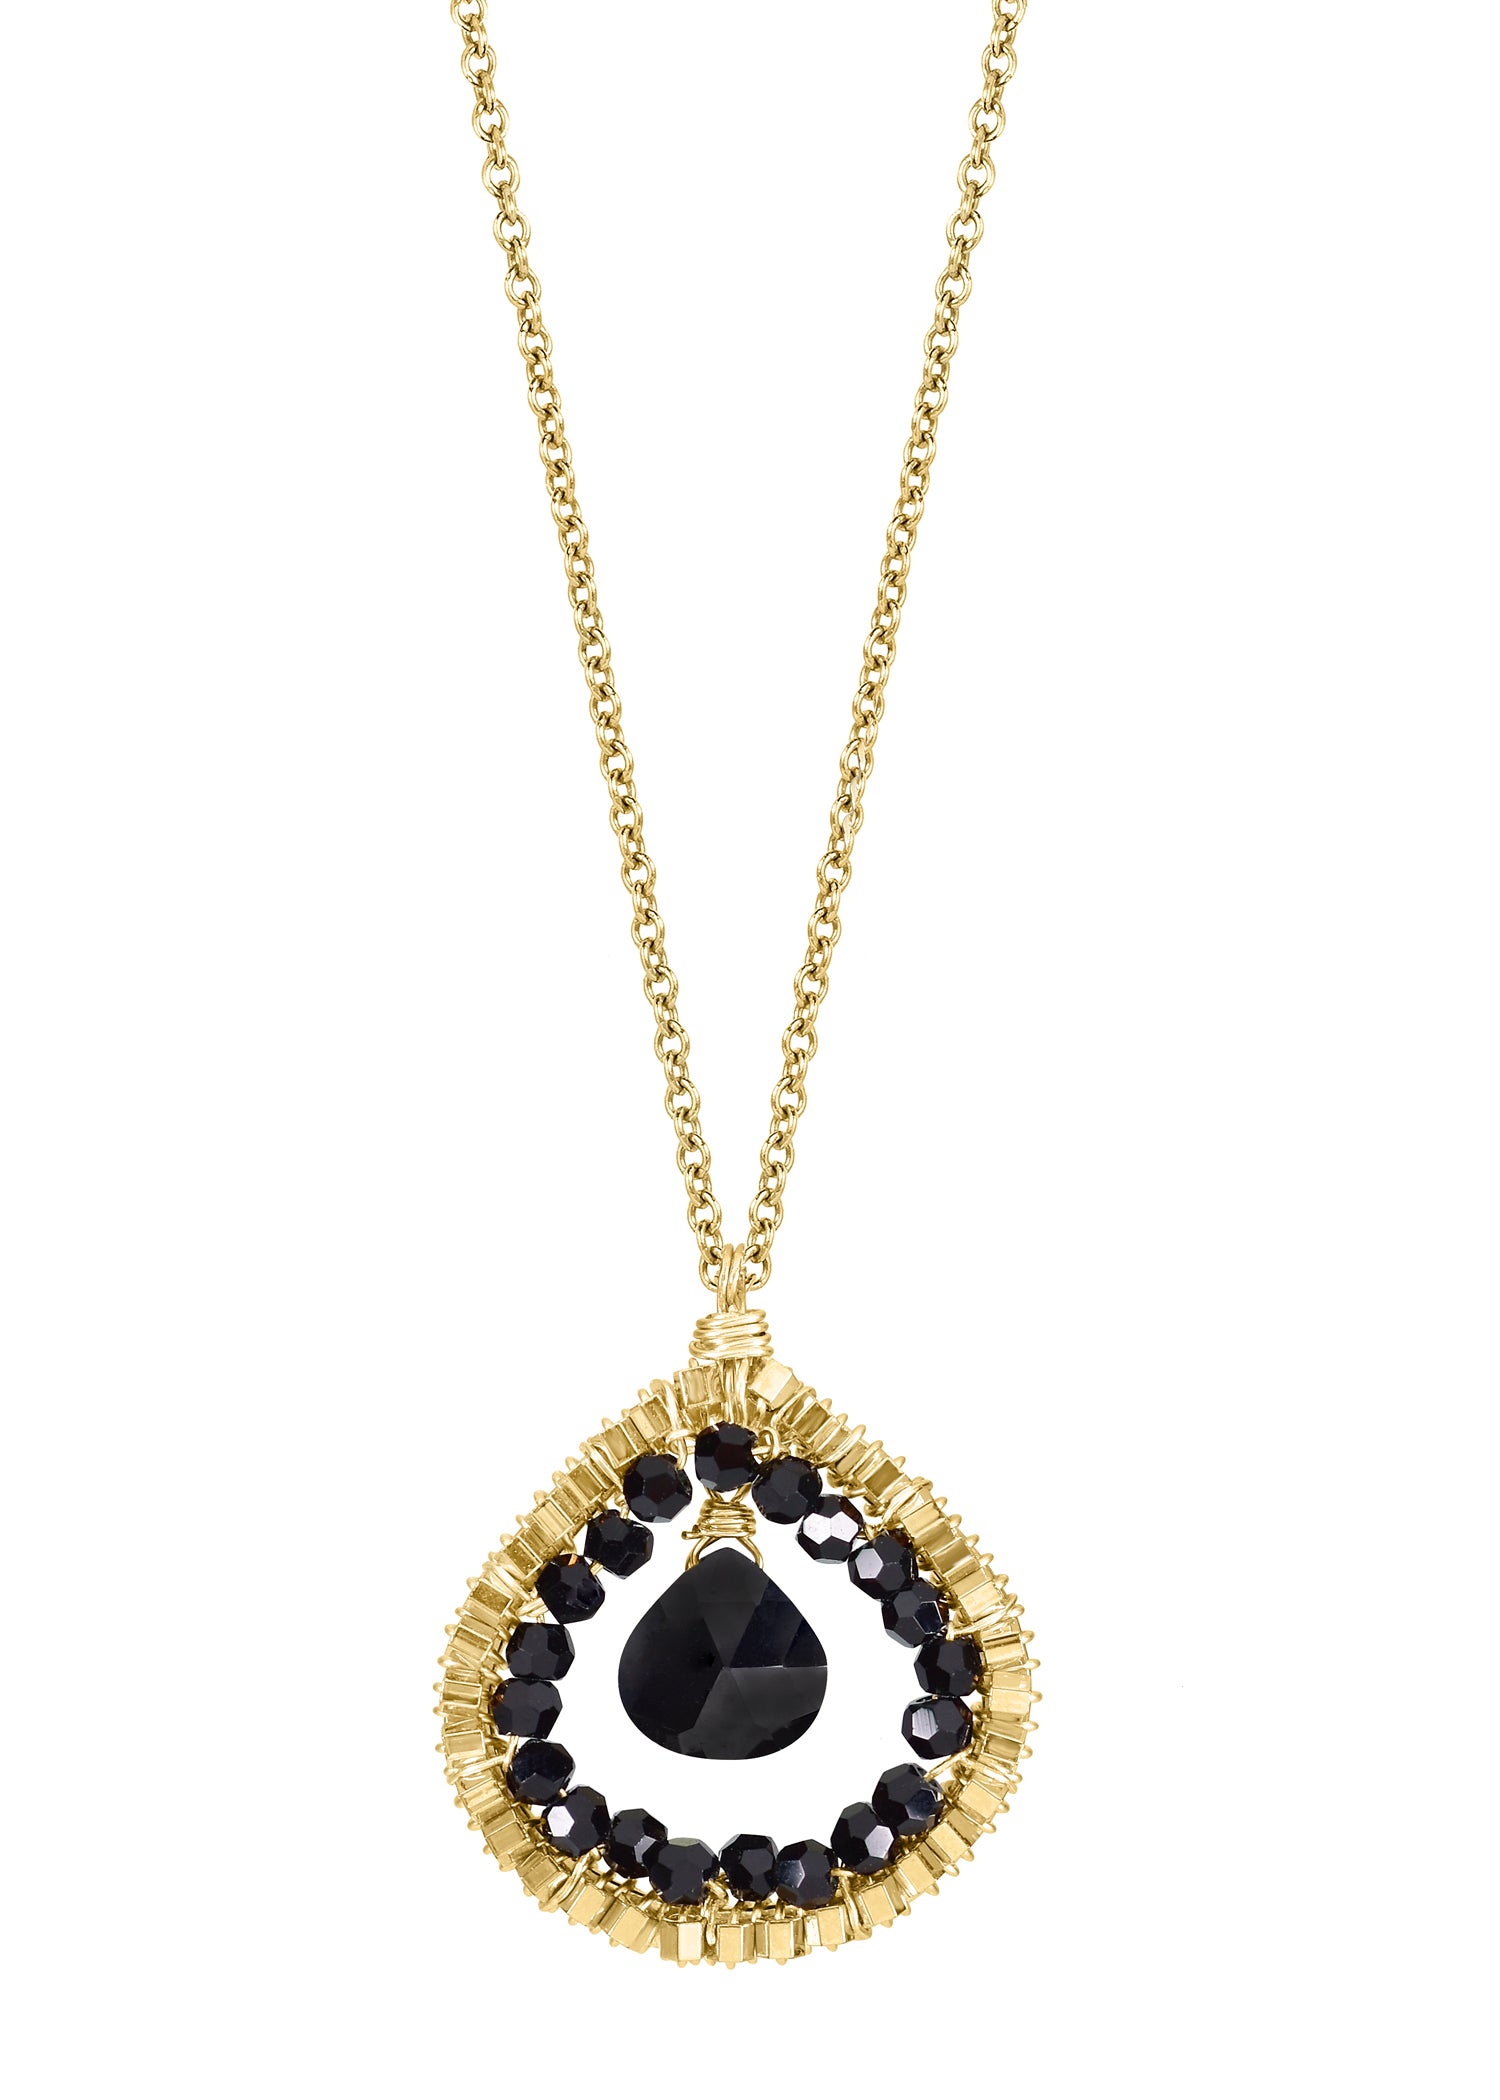 Black spinel Crystal Seed beads 14k gold fill Necklace measures 17" in length Pendant measures 11/16" in length and 5/8" in width at the widest point Handmade in our Los Angeles studio